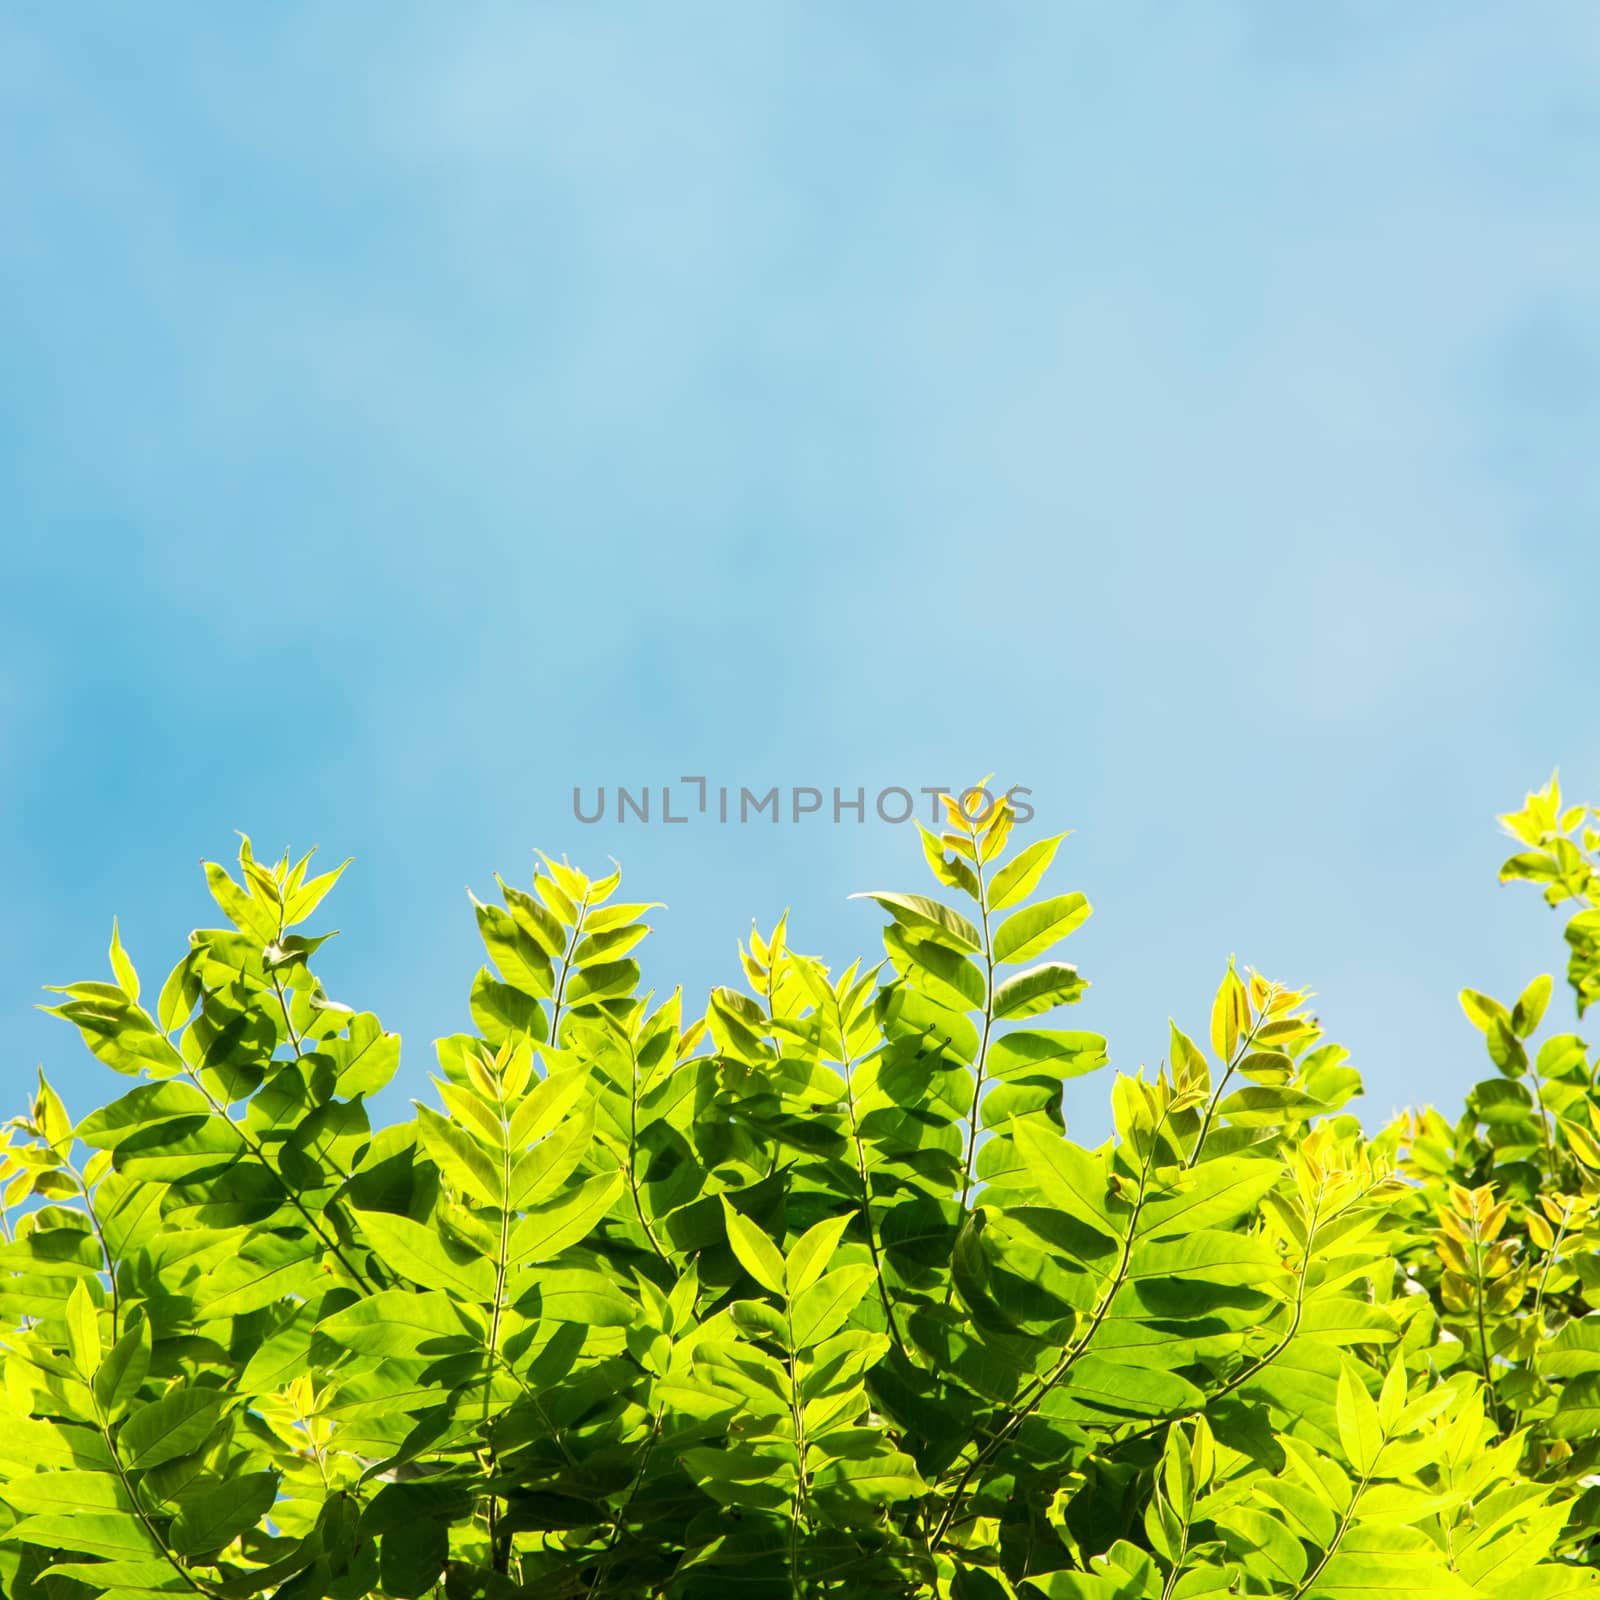 Green leaves shining in the sun on blue sky background